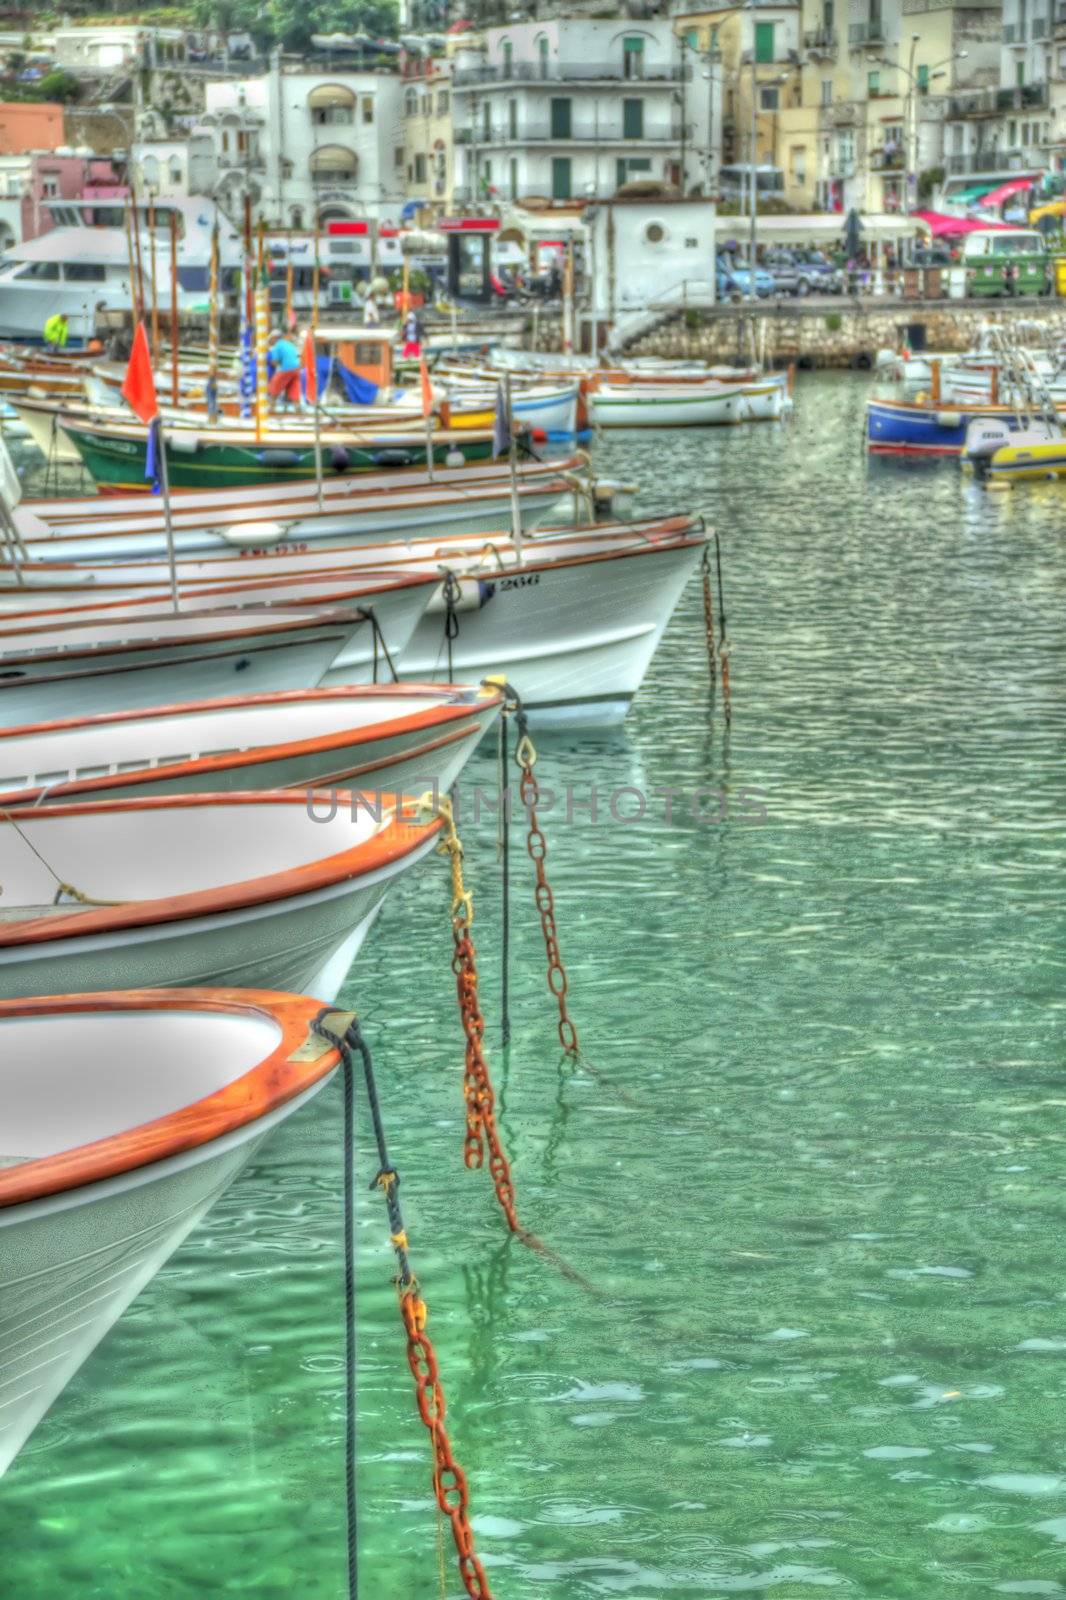 Images of the boats in the harbor of the Italian island of Capris, processed to appear is if they were painted.